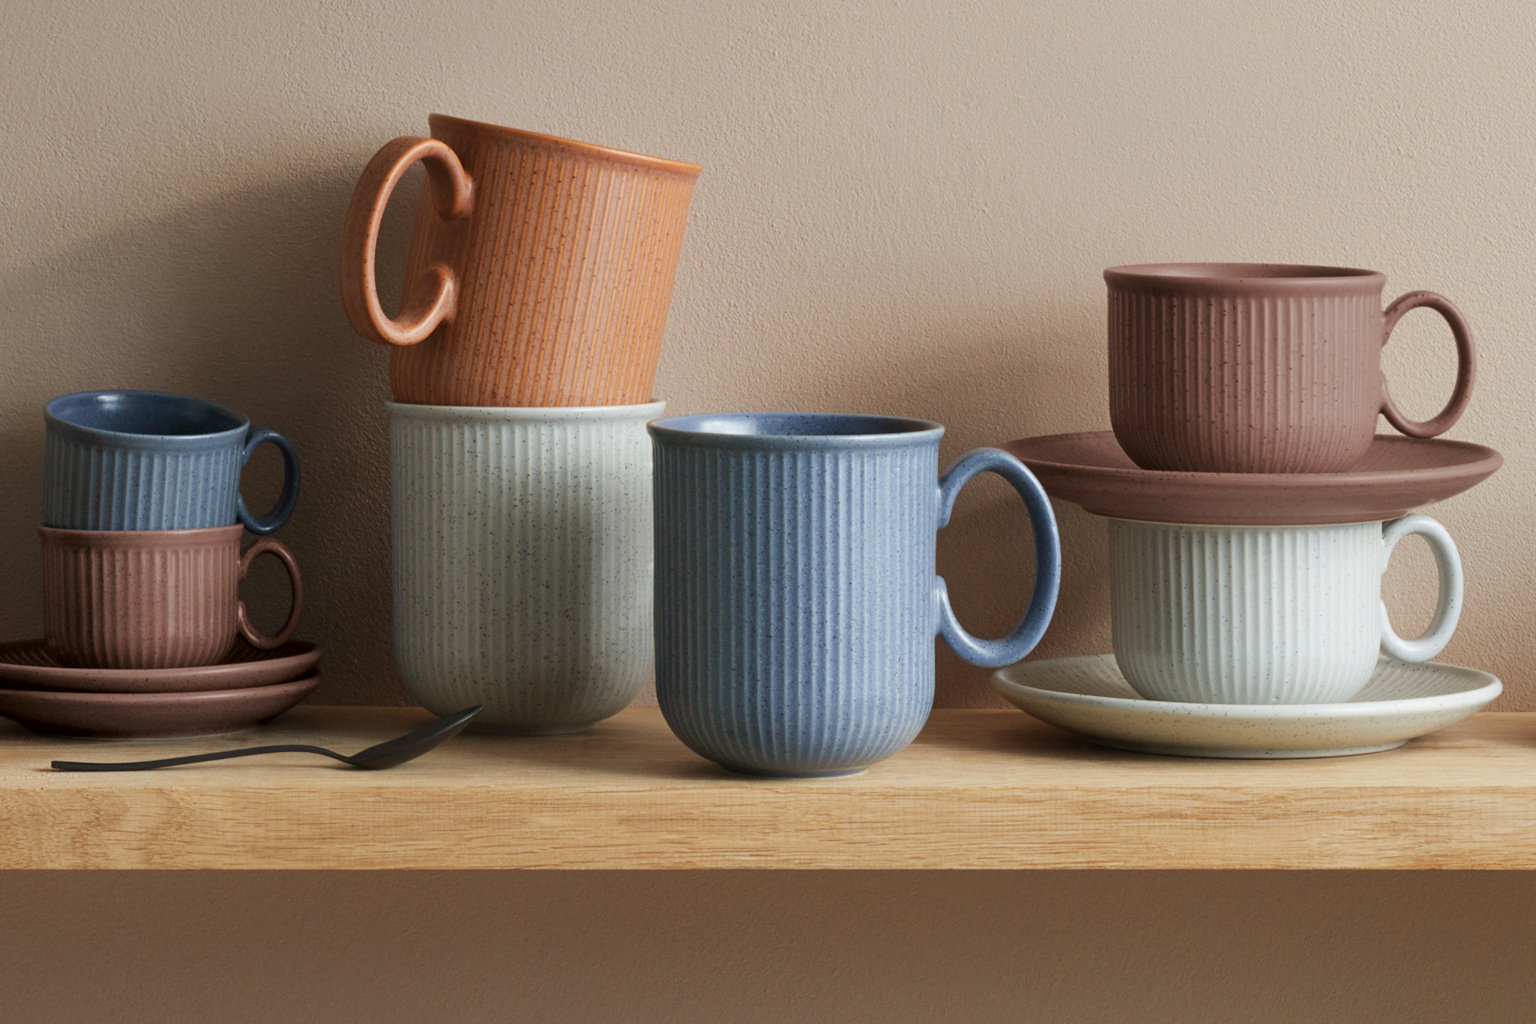 Thomas Clay mugs and cups in different colors